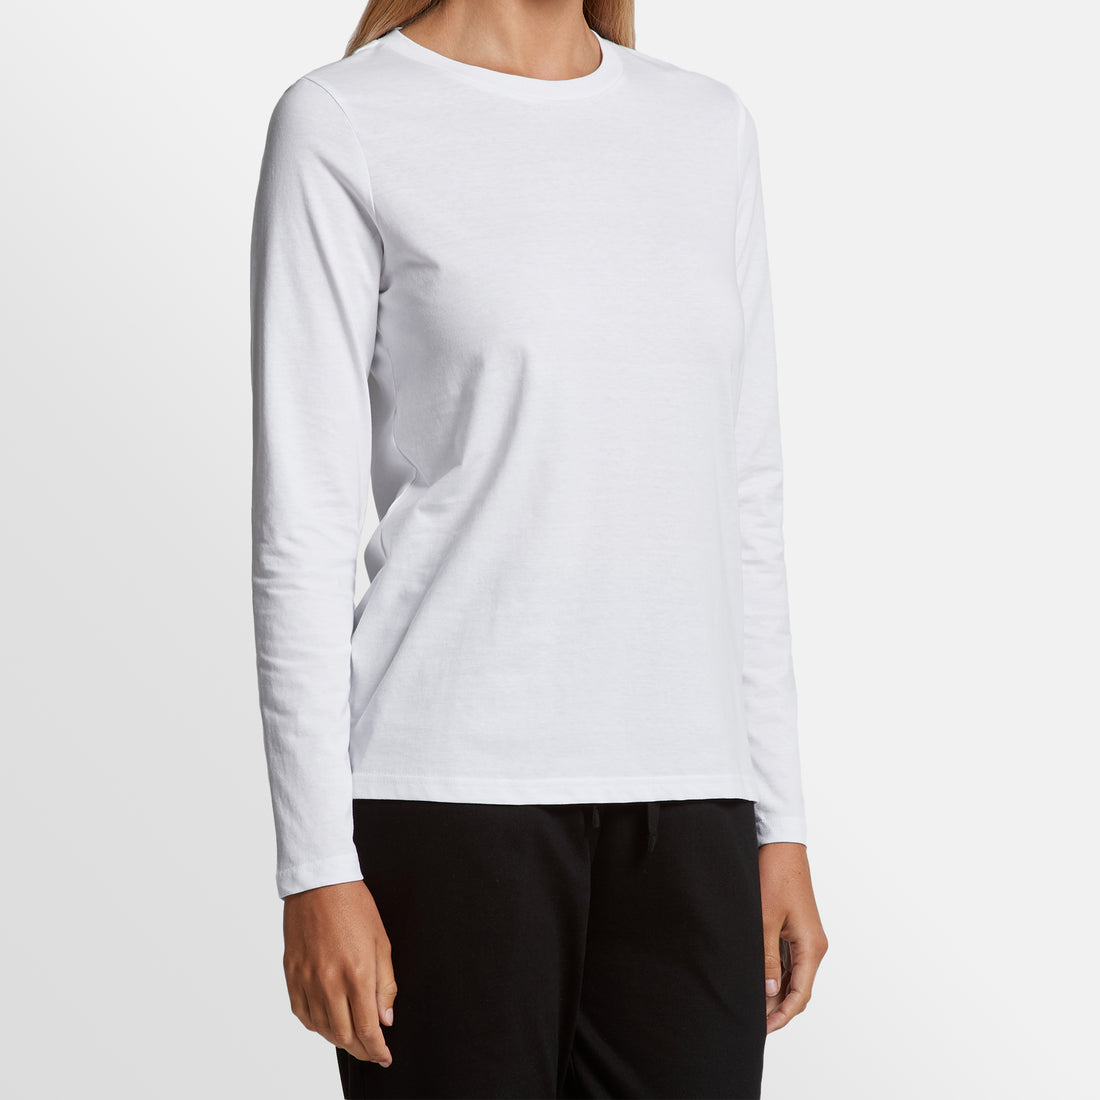 Sophie Long Sleeve Tee - On Request